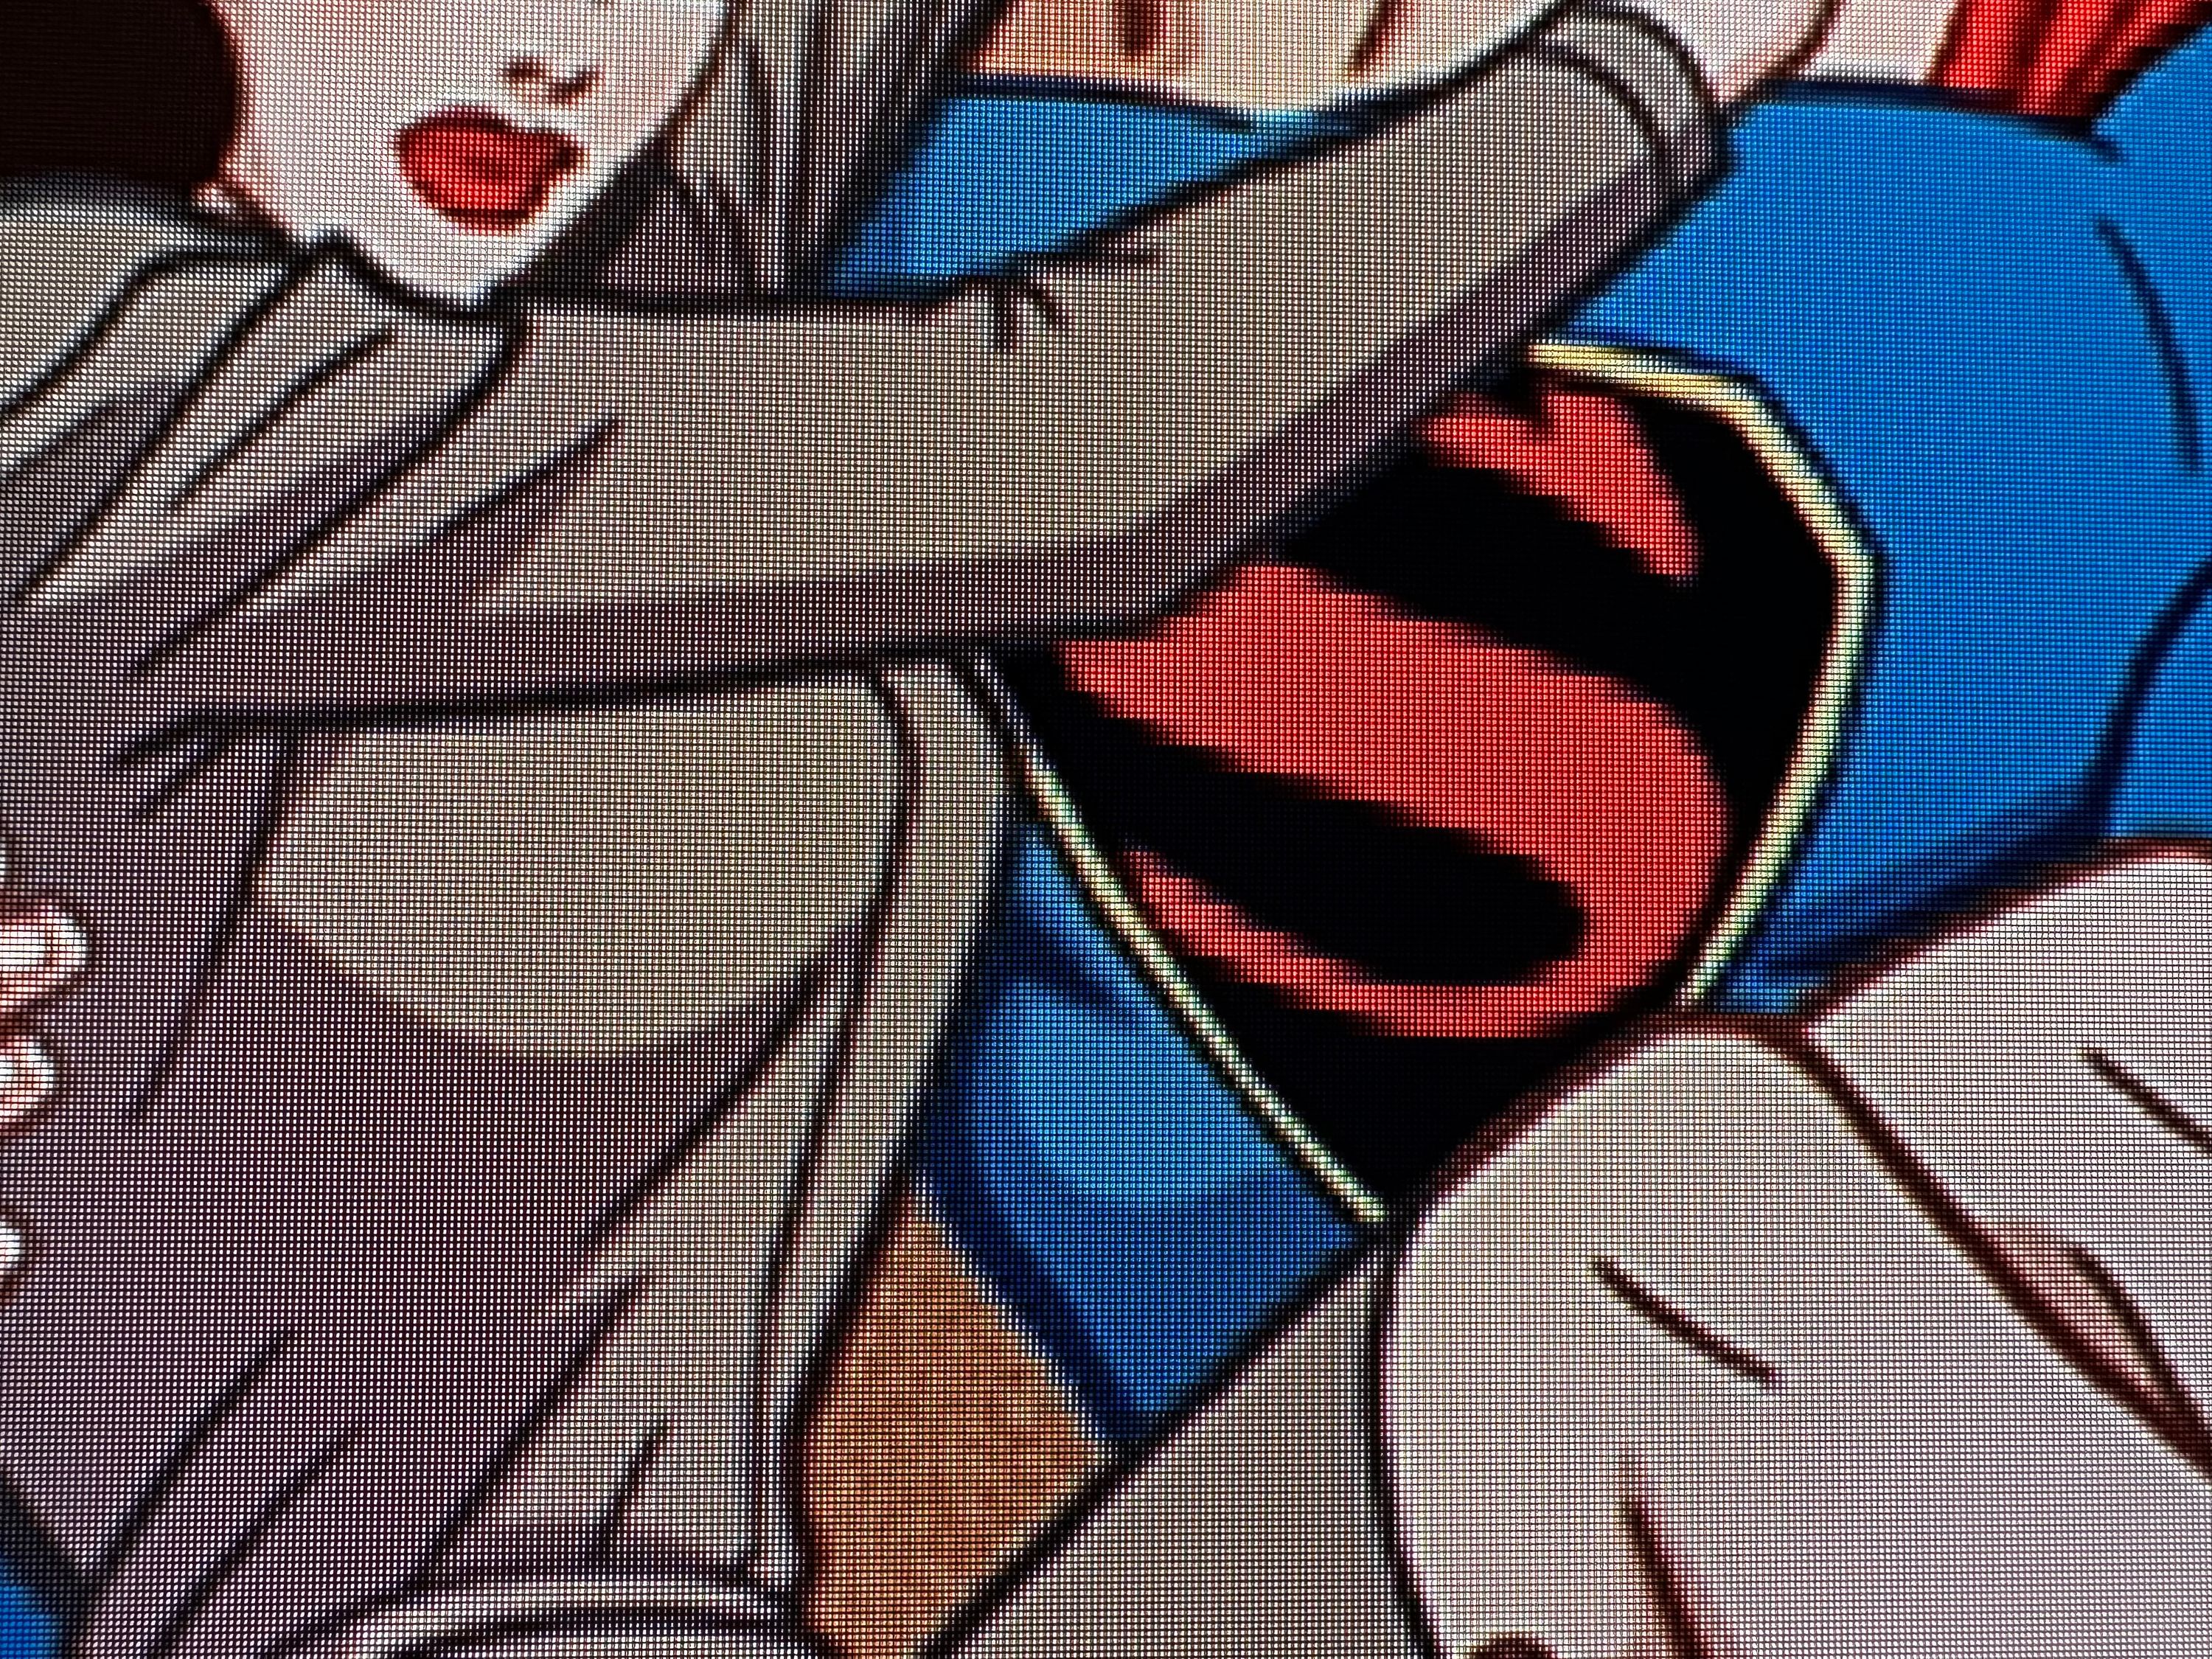 A close up of Superman’s chest showing pixellation on the S logo